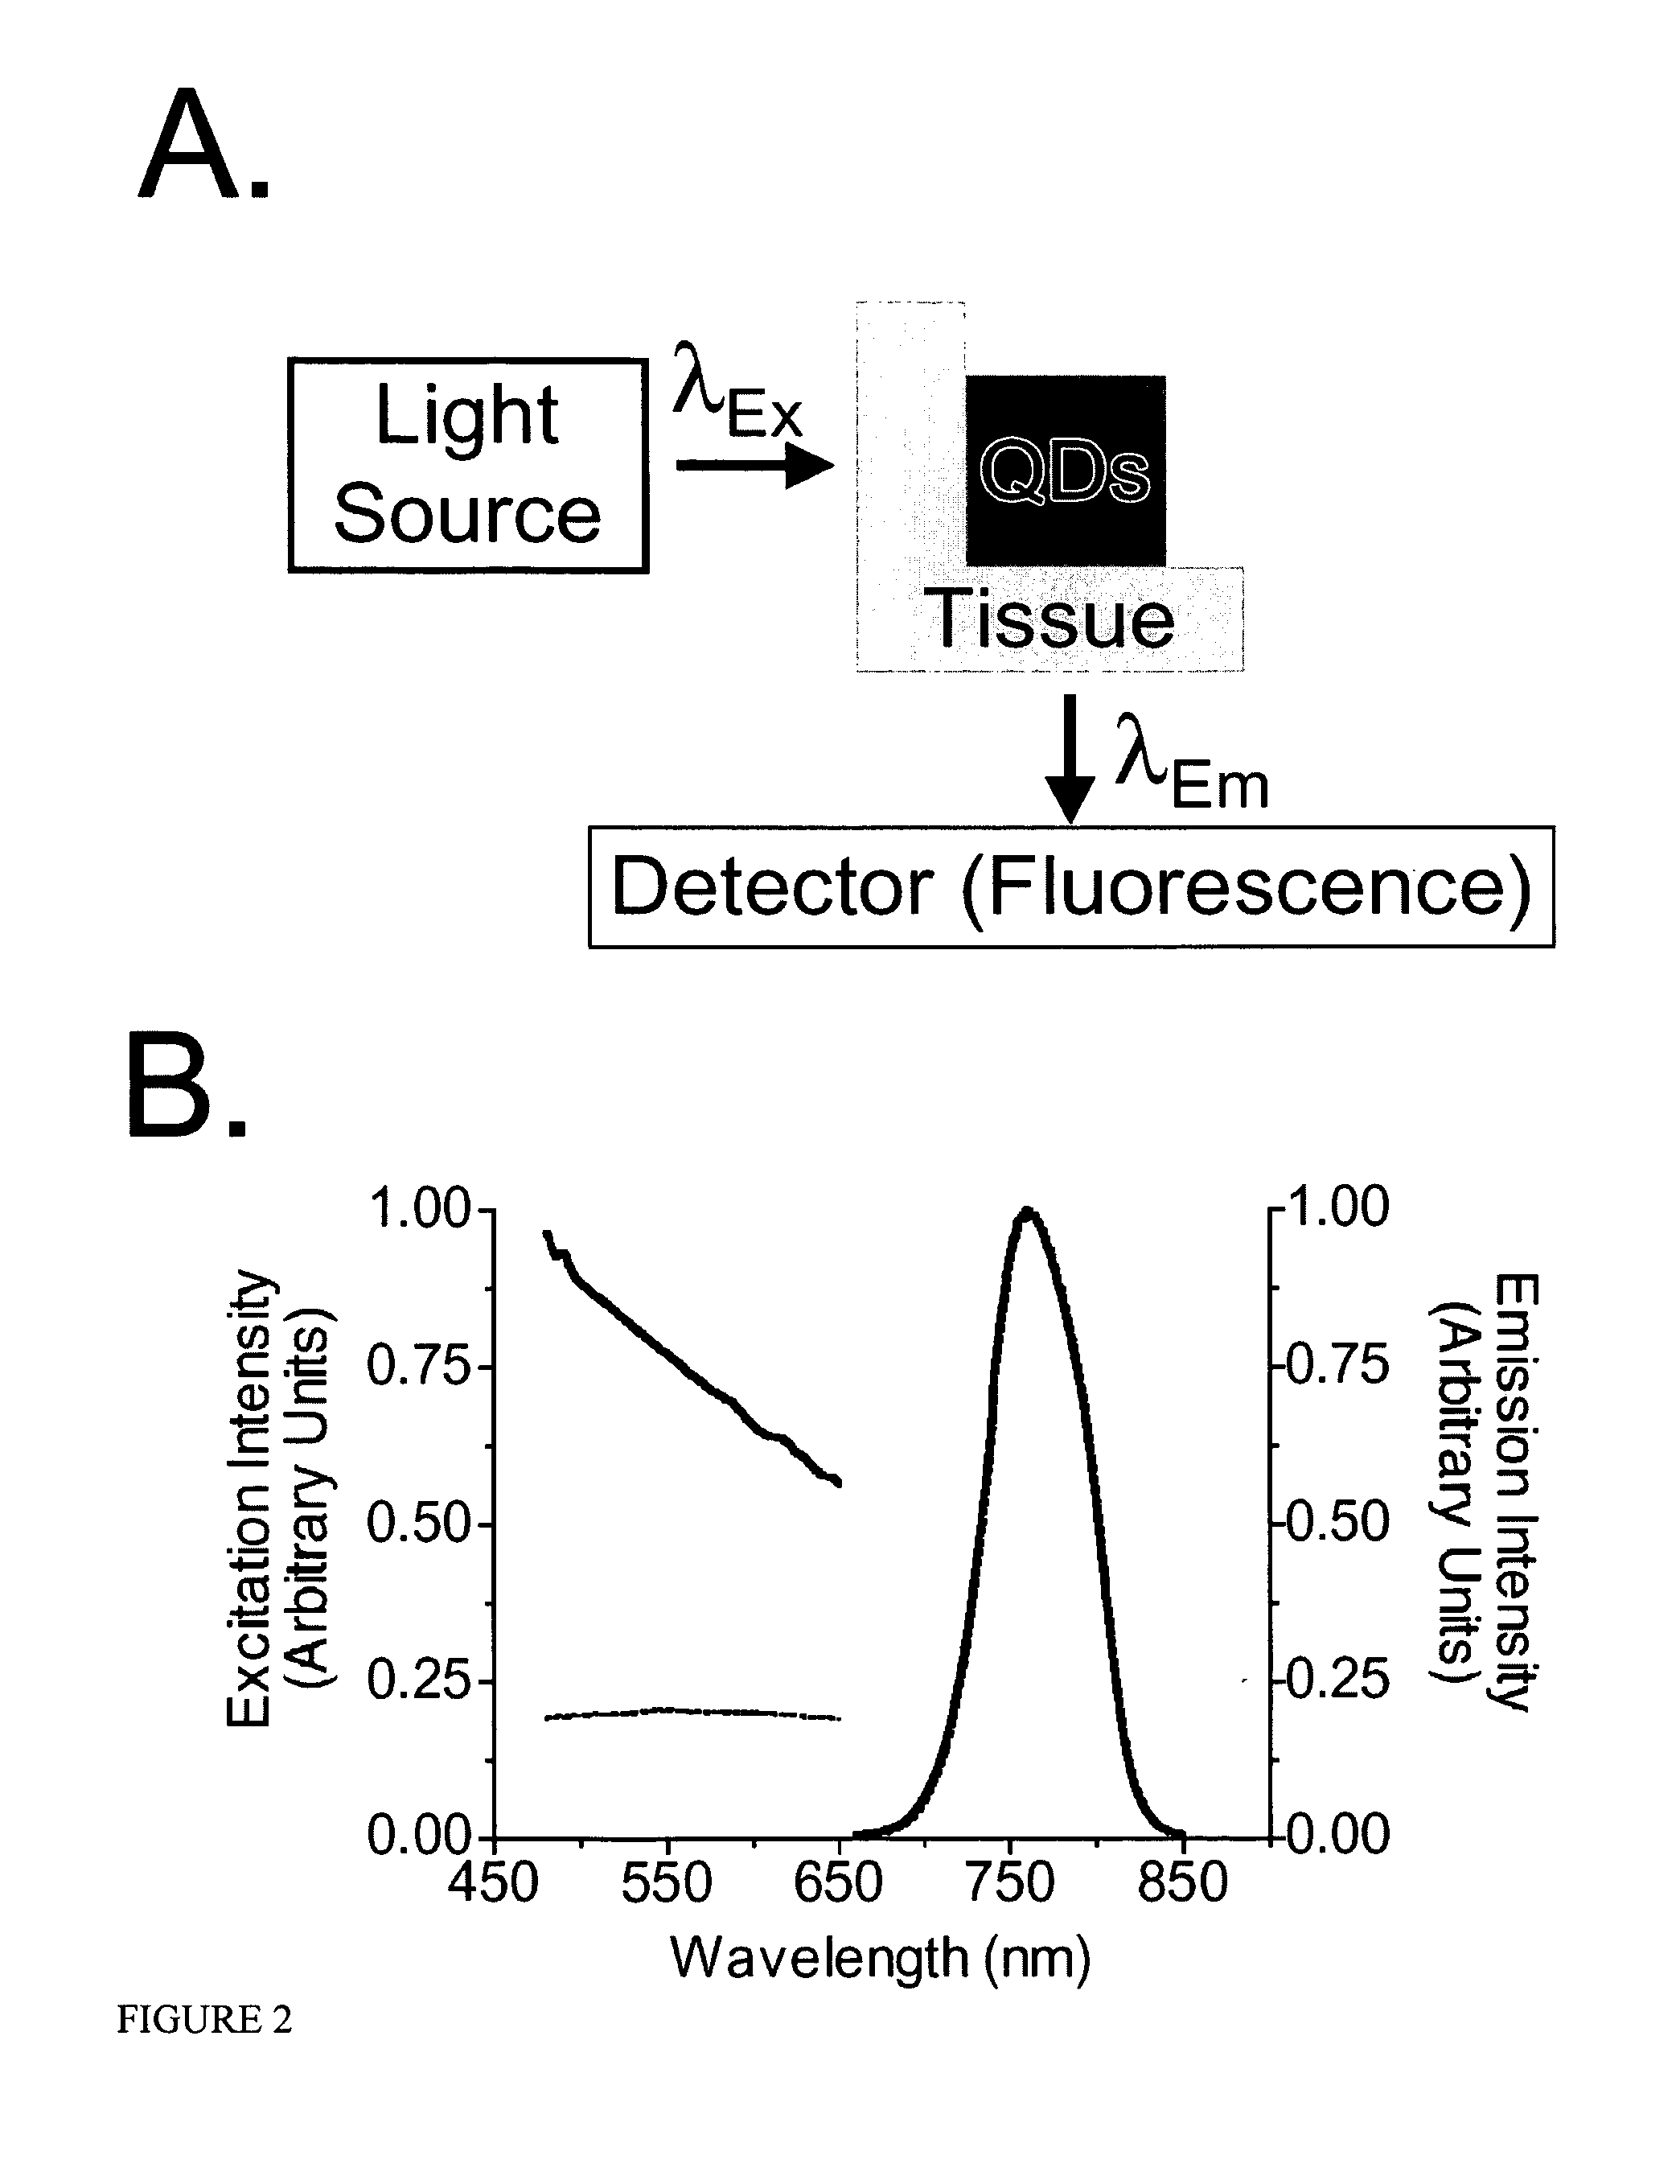 Materials and methods for near-infrared and infrared intravascular imaging